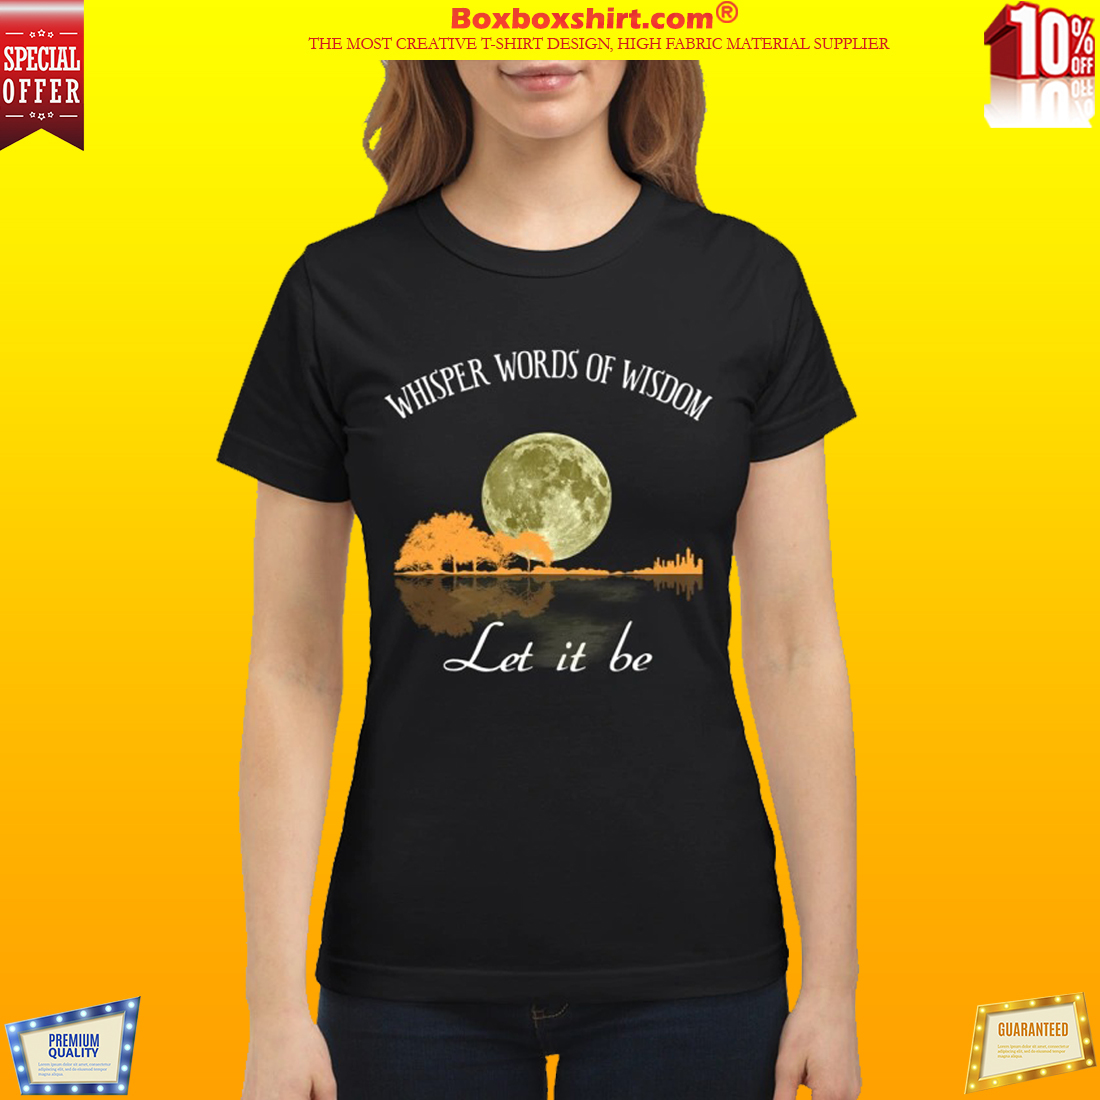 Guitar and moon whisper words of wisdom let it be classic shirt